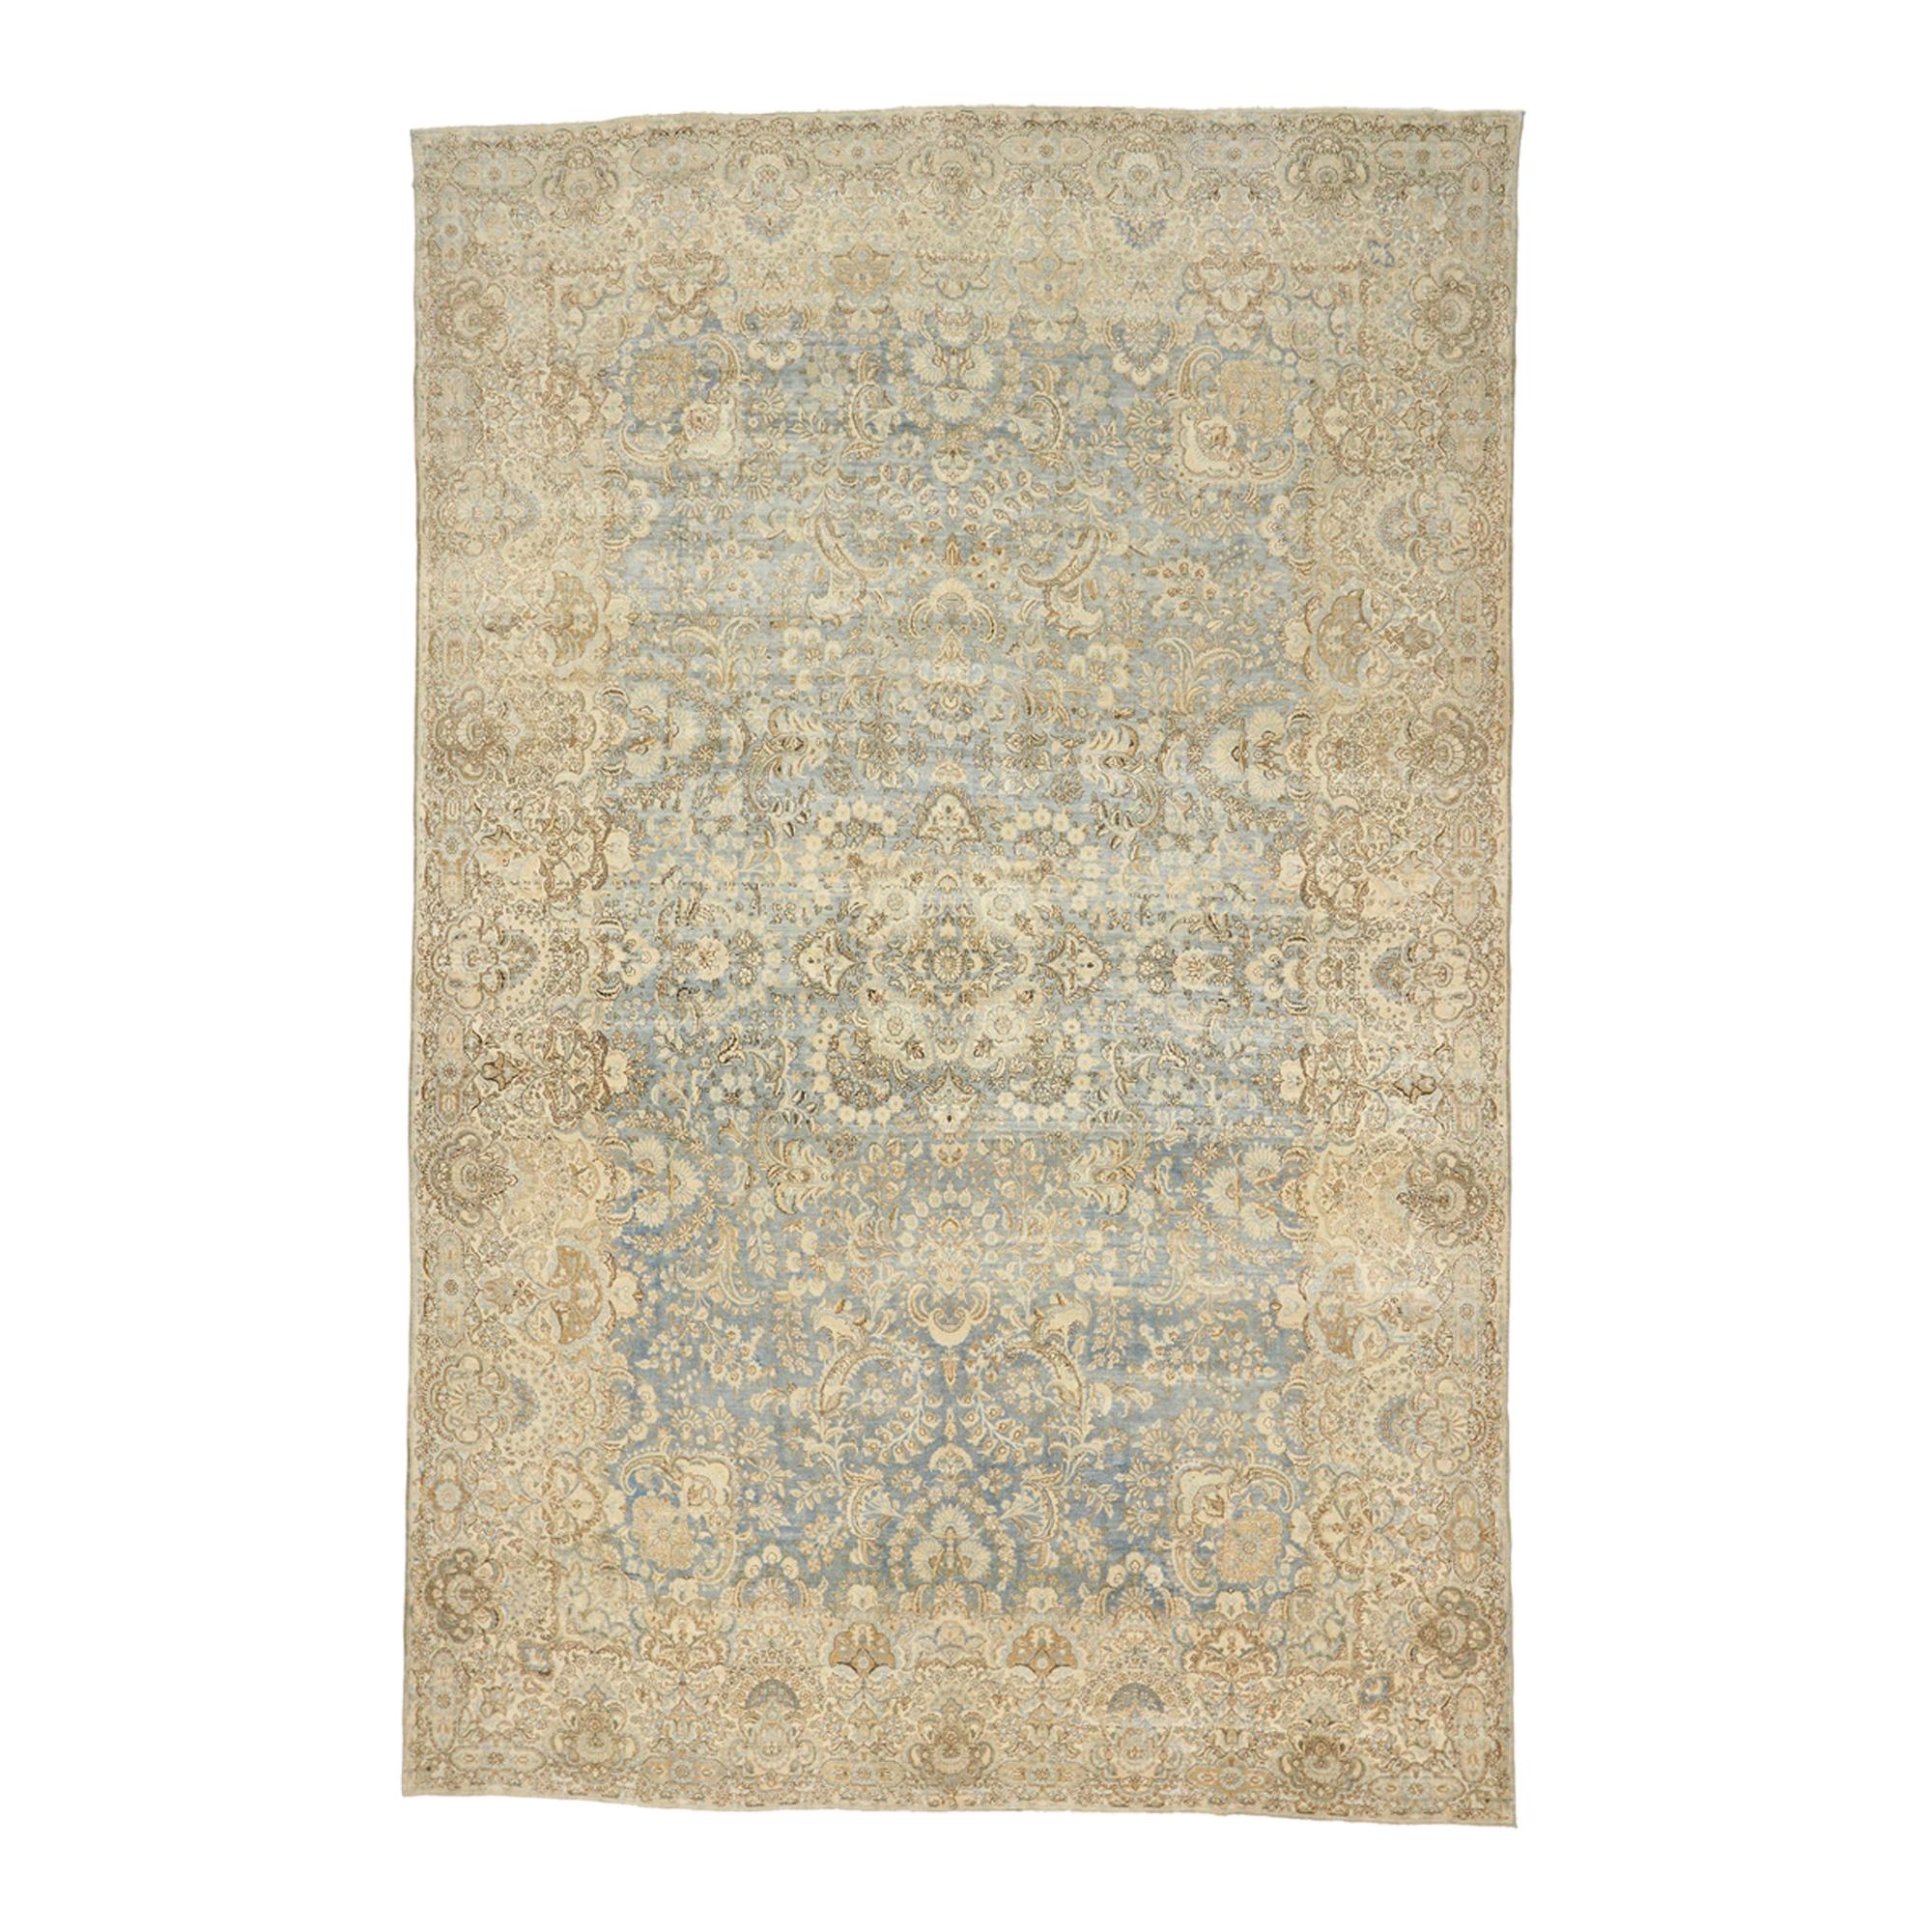 Distressed Antique Persian Kerman Palace Rug with Cotswold Country Cottage Style For Sale